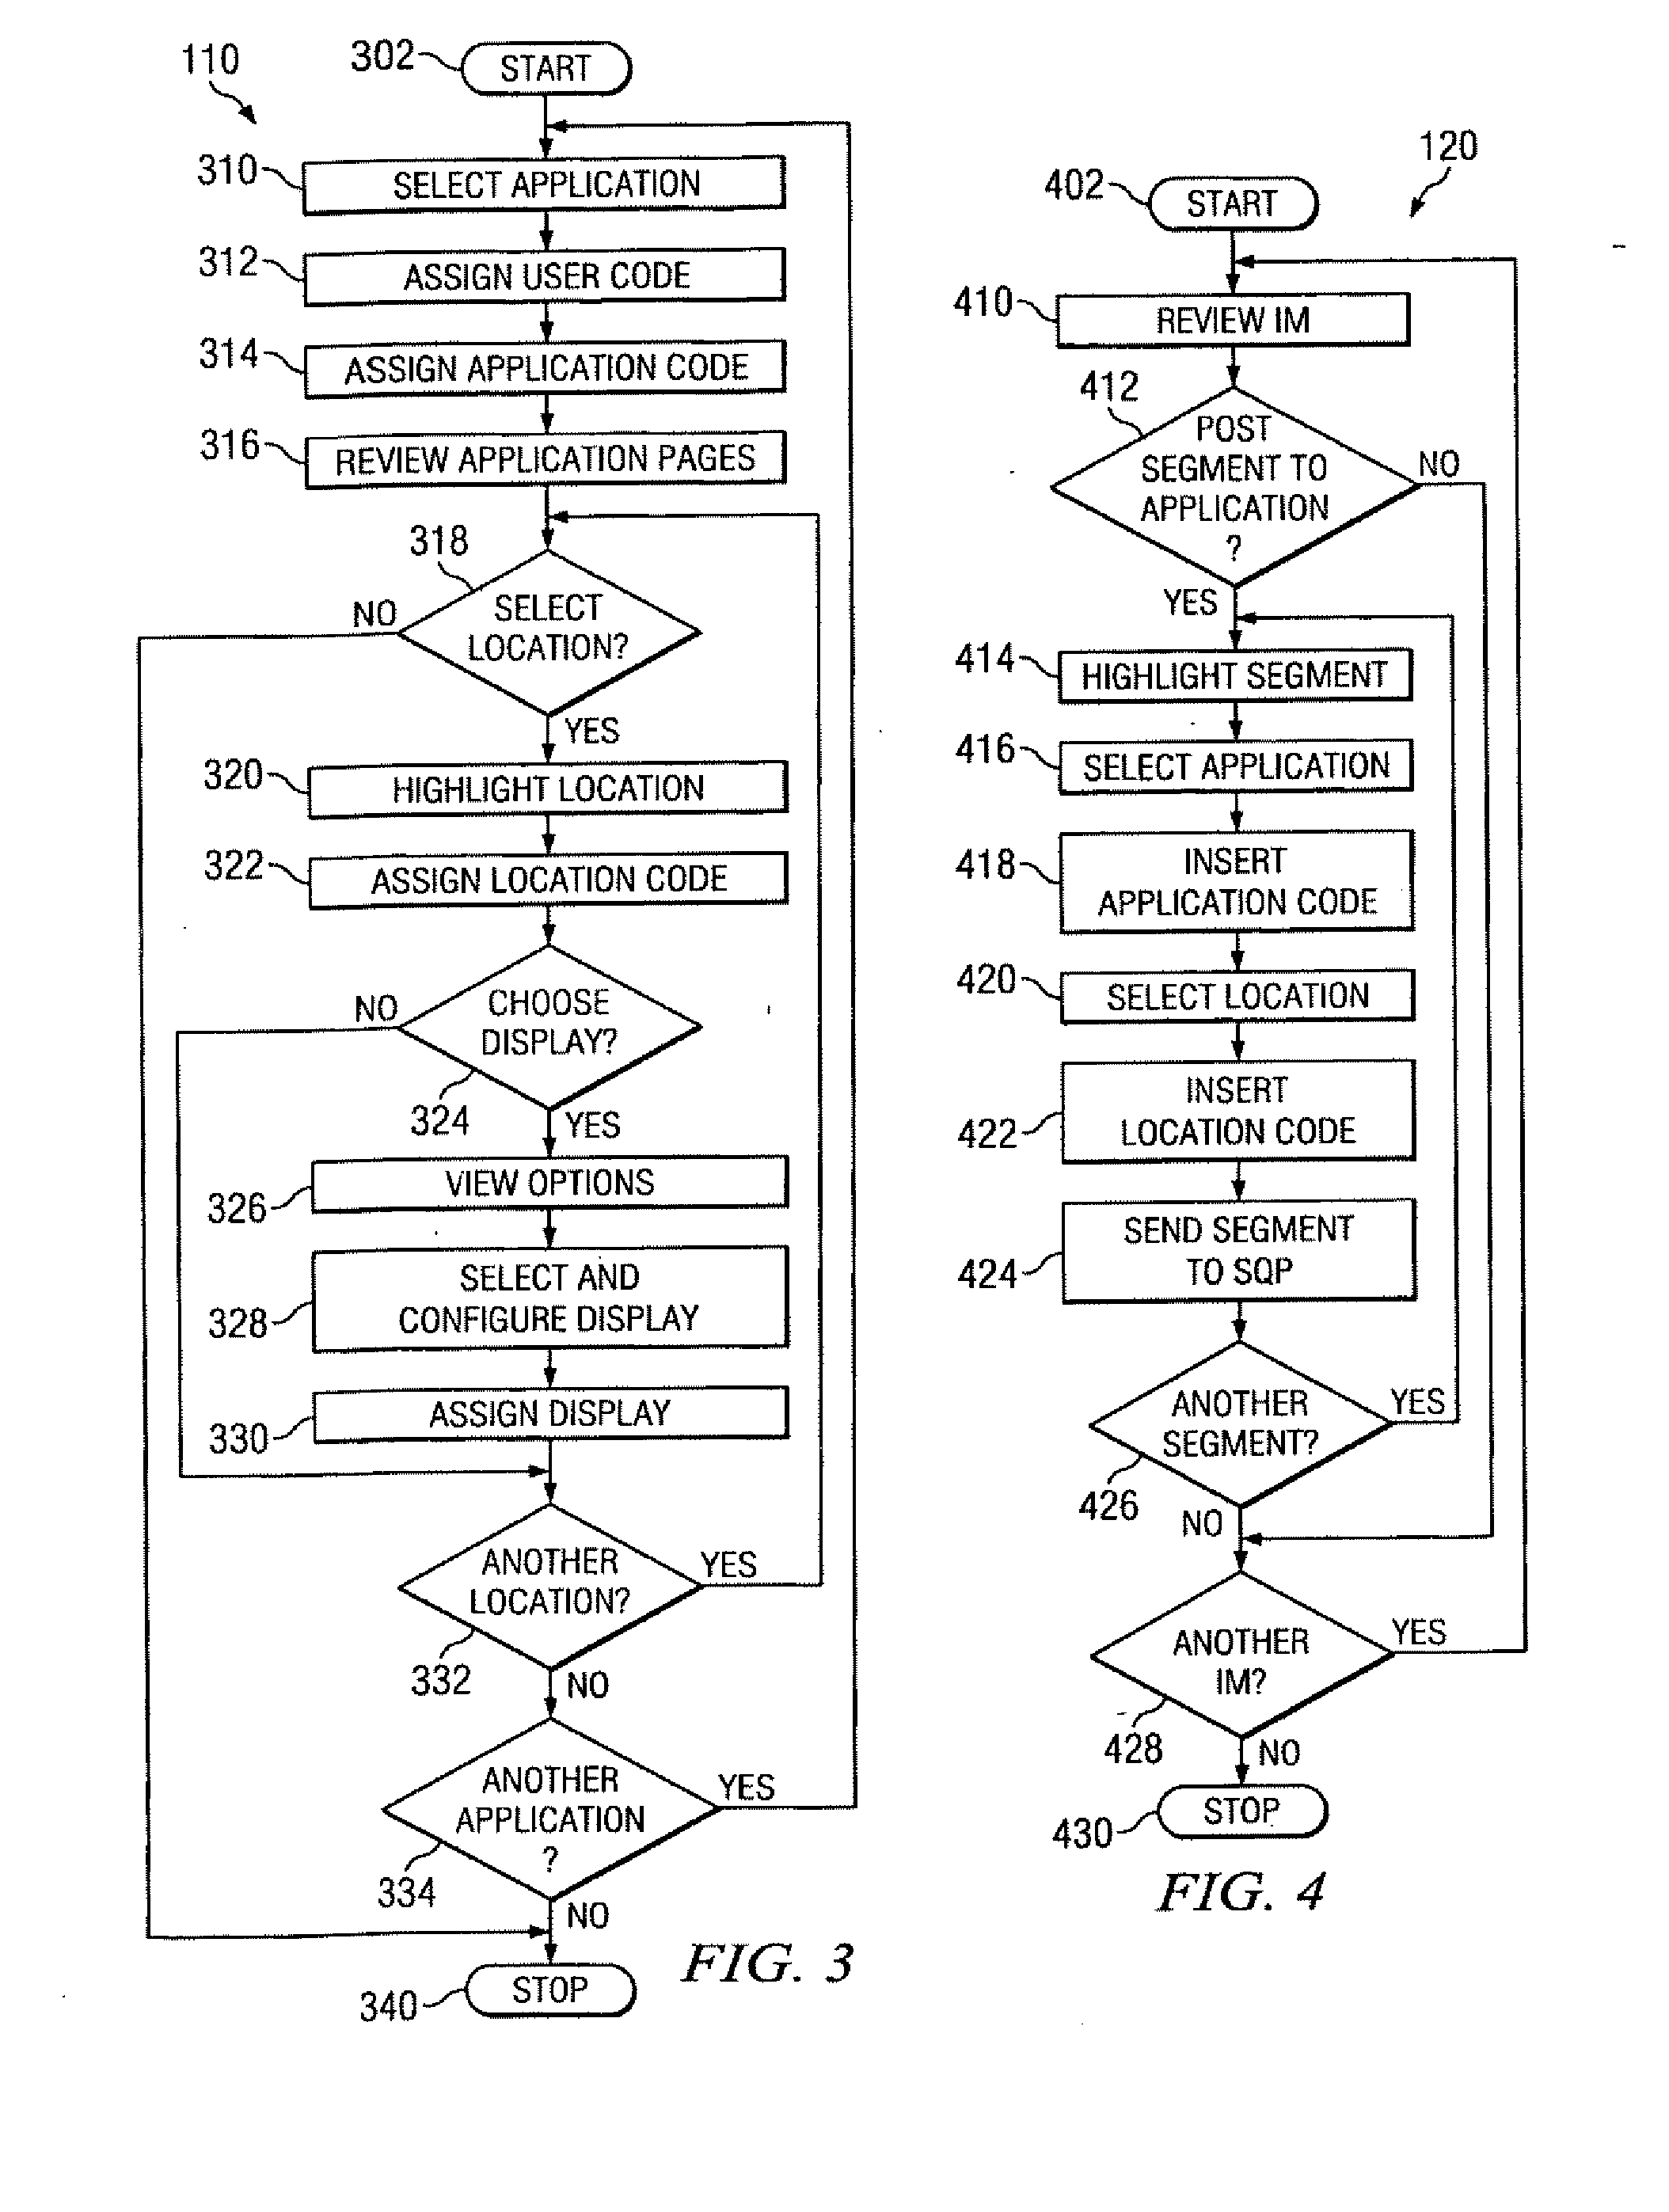 Method to Enable Selection of Segments in an Instant Messaging Application for Integration in Other Applications